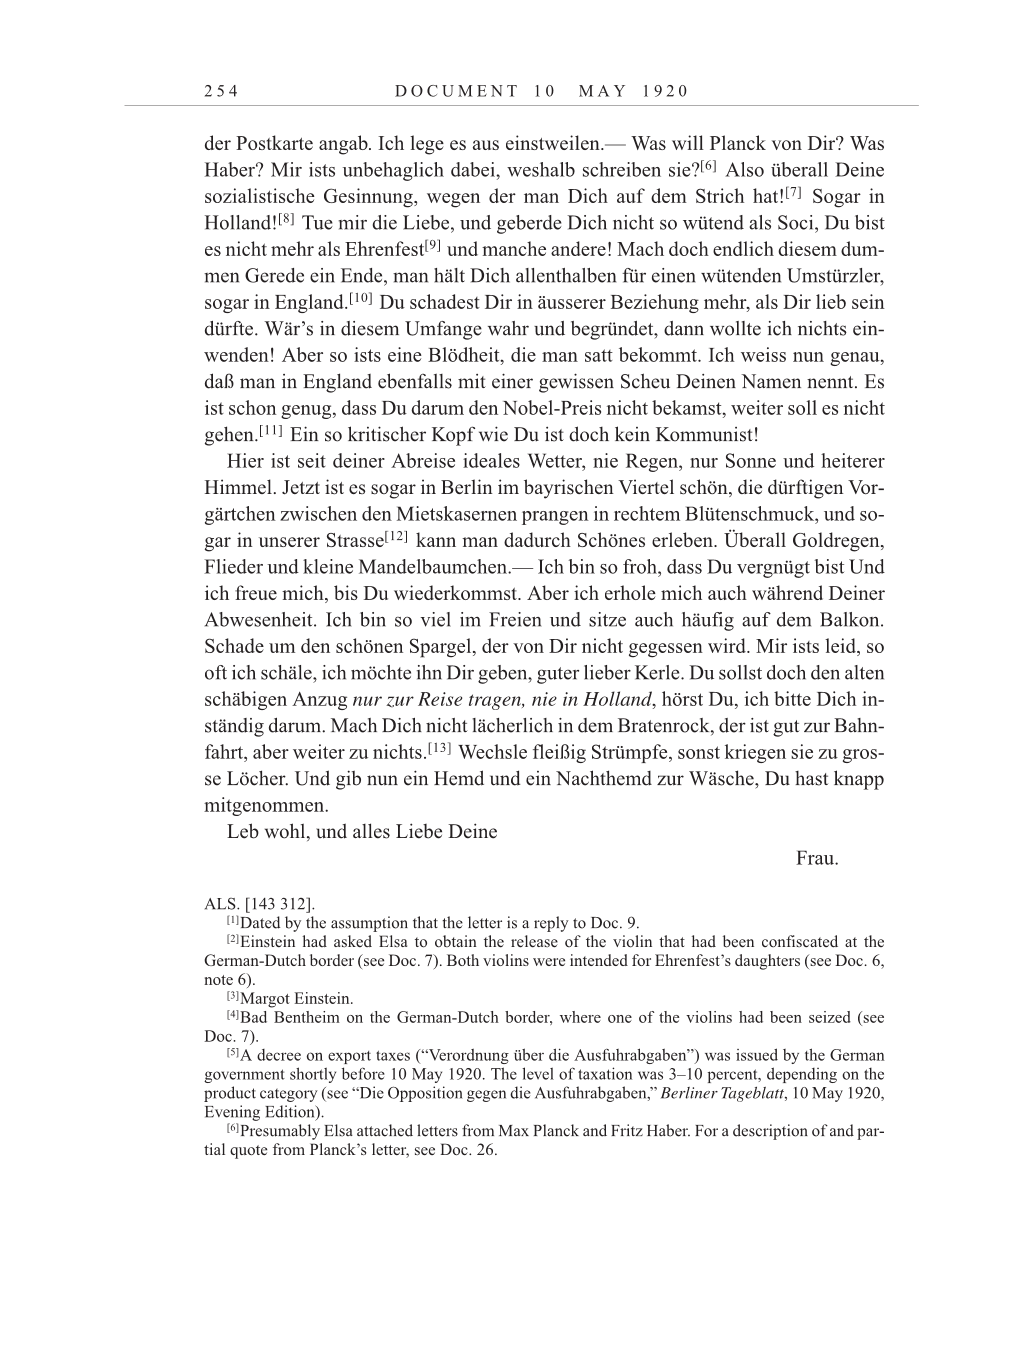 Volume 10: The Berlin Years: Correspondence May-December 1920 / Supplementary Correspondence 1909-1920 page 254